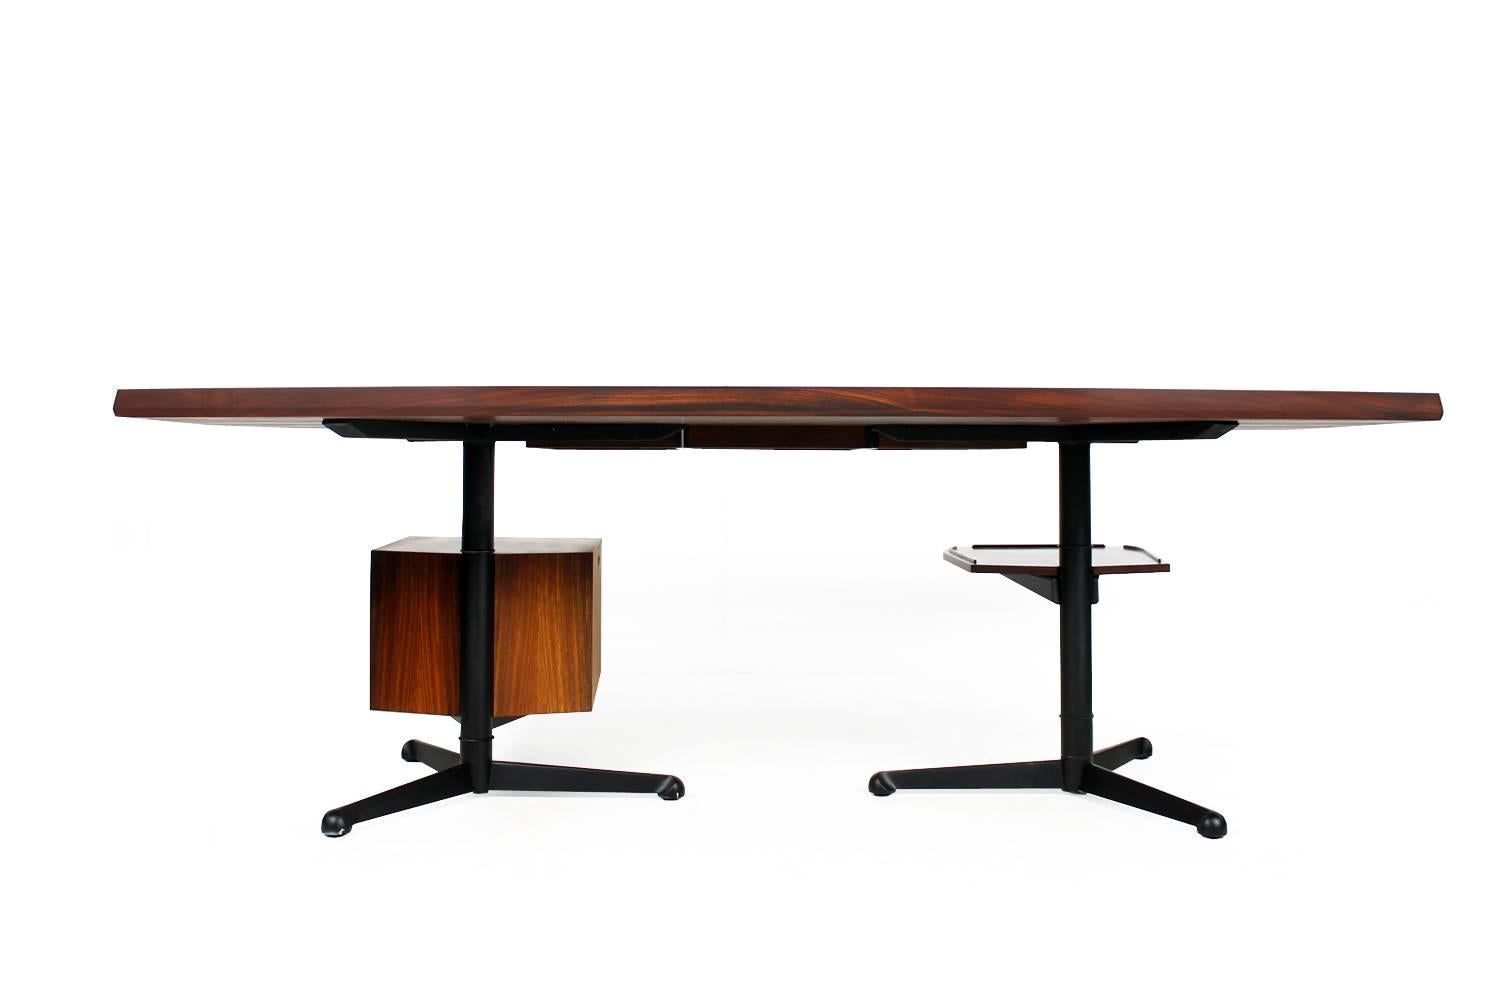 Rare T98 writing table, metal base, rosewood and leather.
Very large and heavy weight desk, fantastic vintage condition, this one was bought in 1969. 
The tray can be pulled out and it can be changed with the storage with three-drawer-unit can if